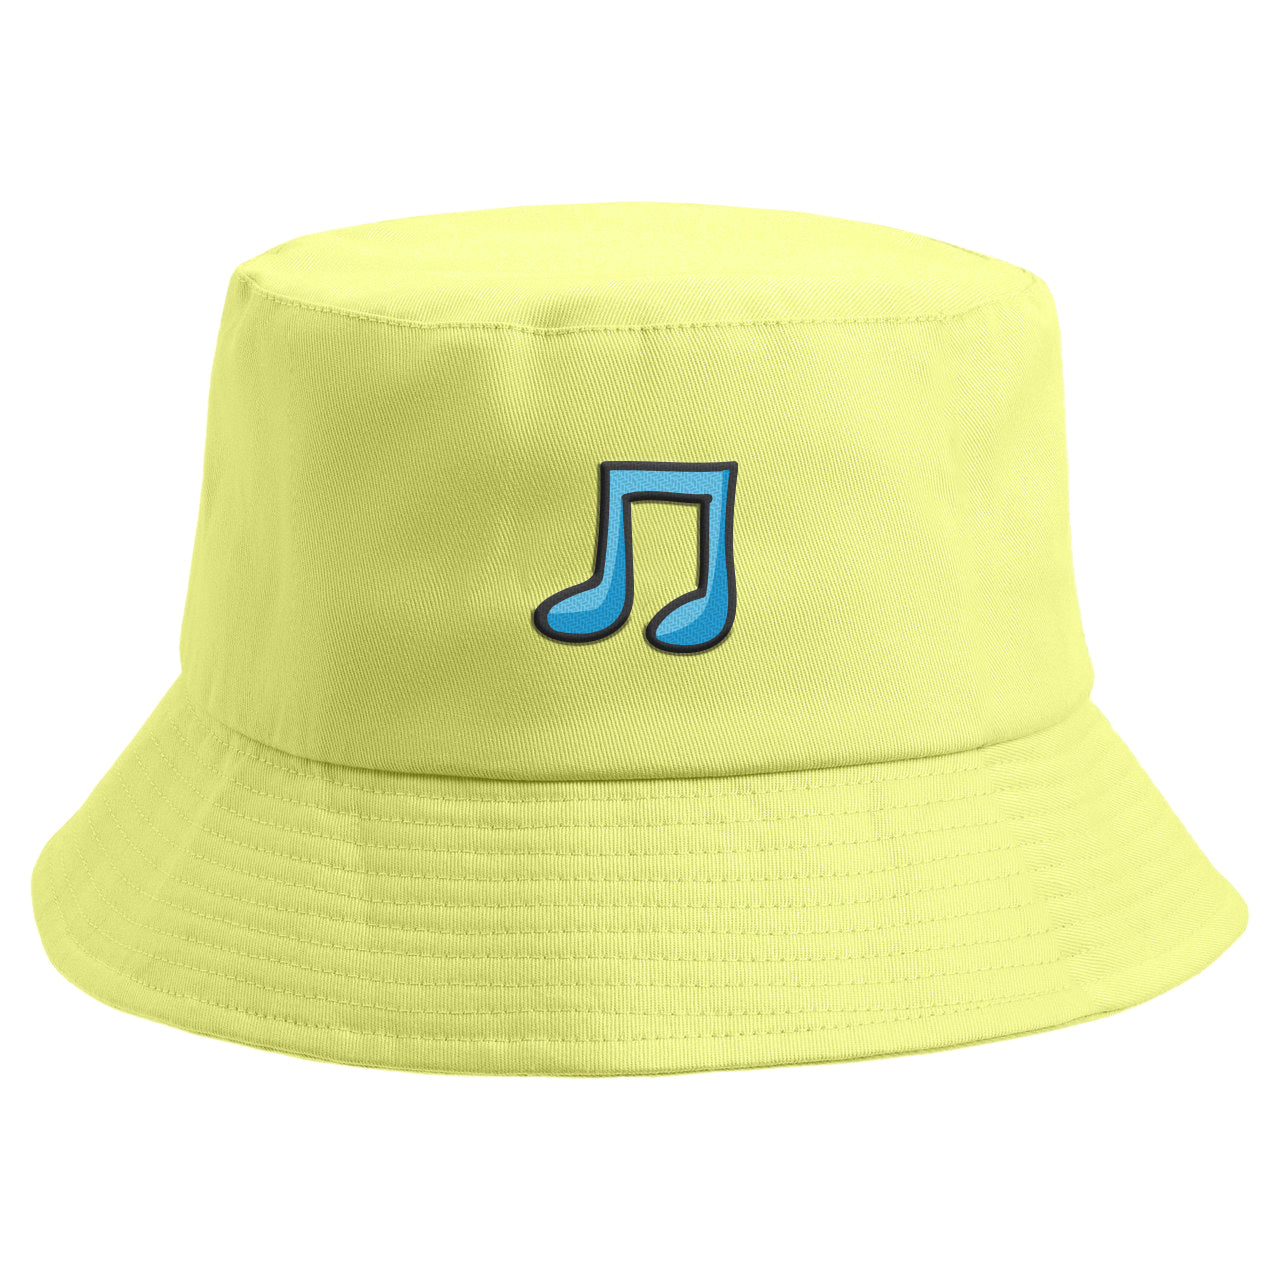 Embroidered Musical Note Bucket Hat